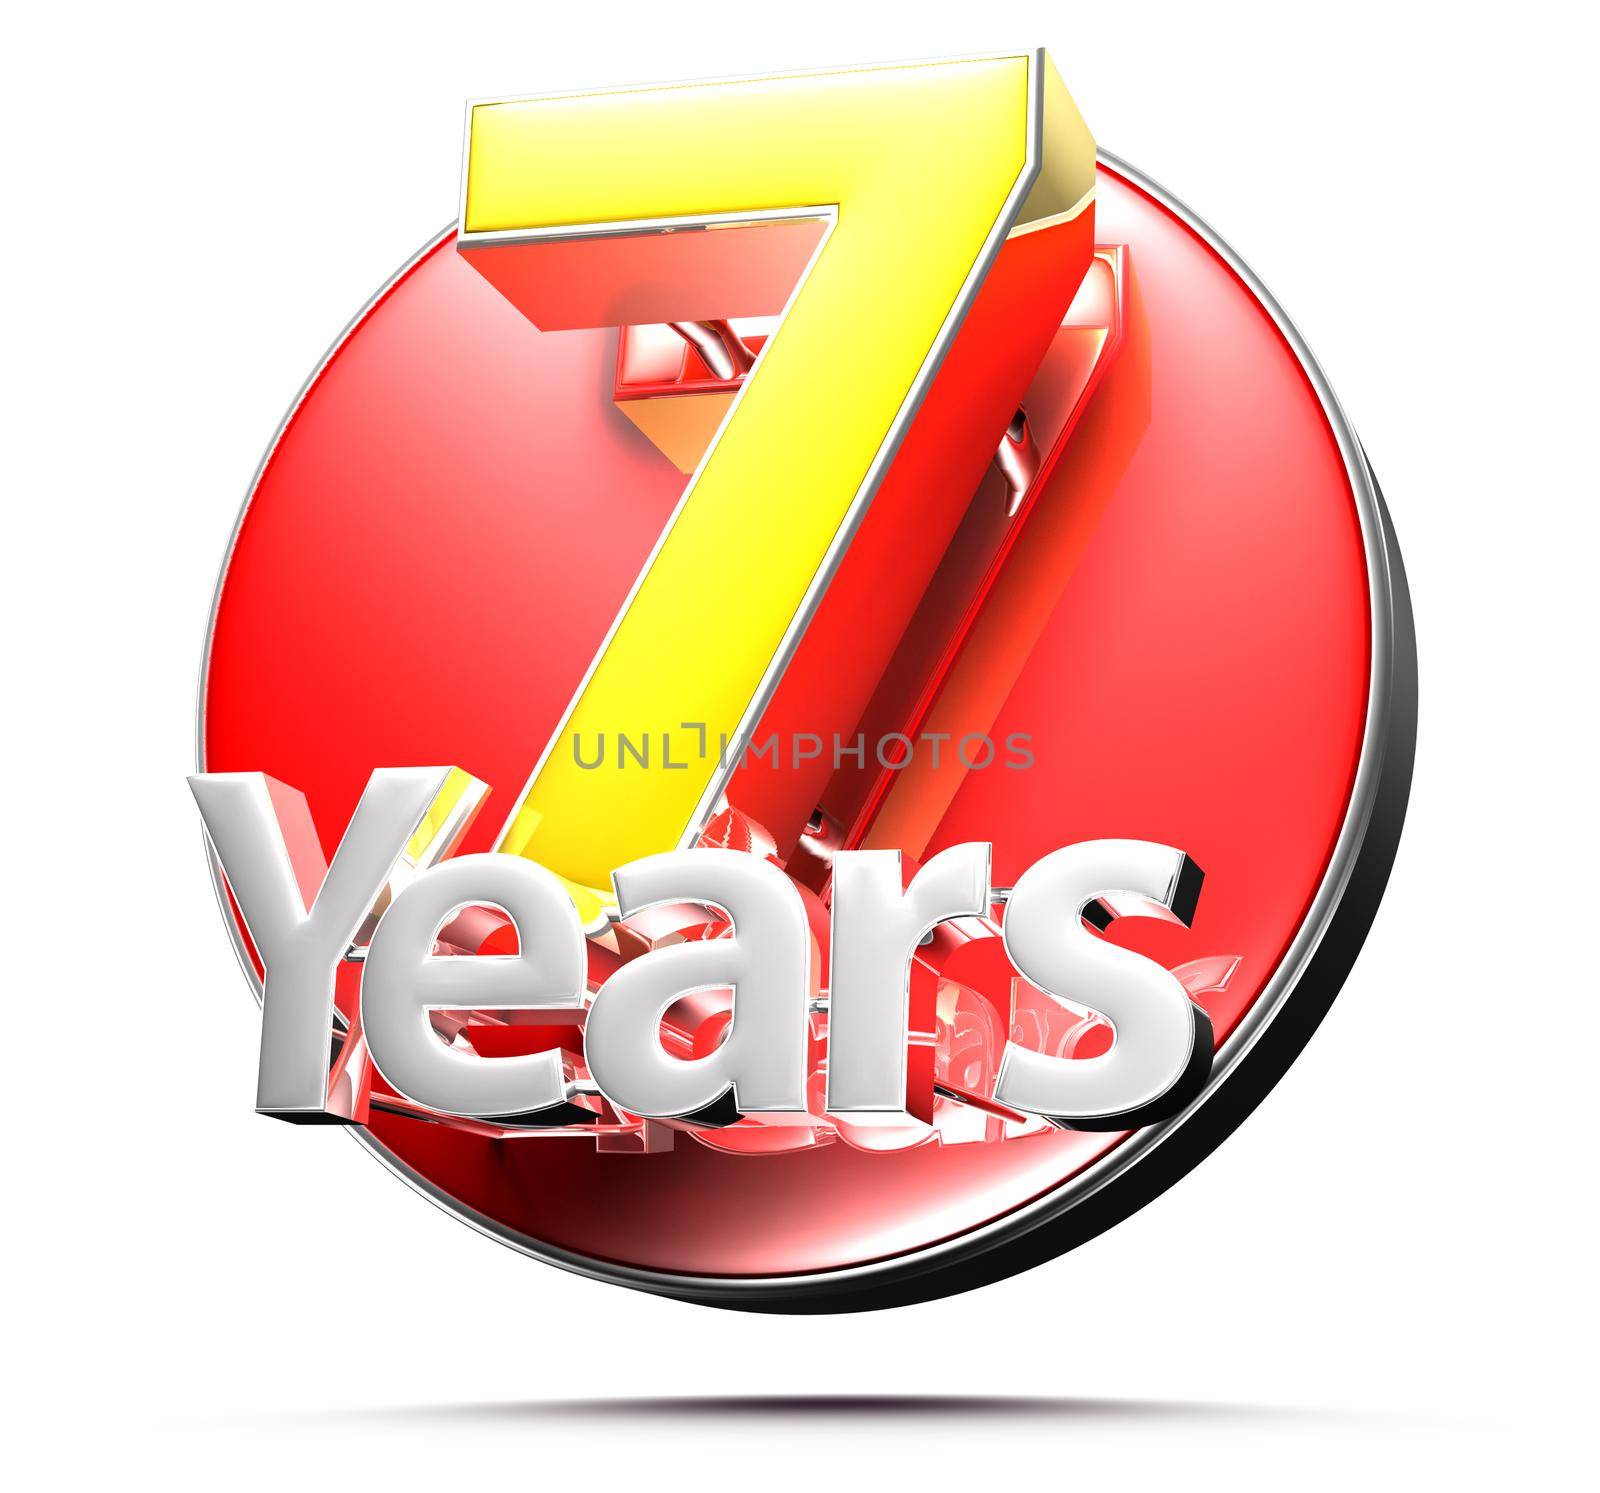 Sign 7 years isolated on white background  3D illustration with clipping path.